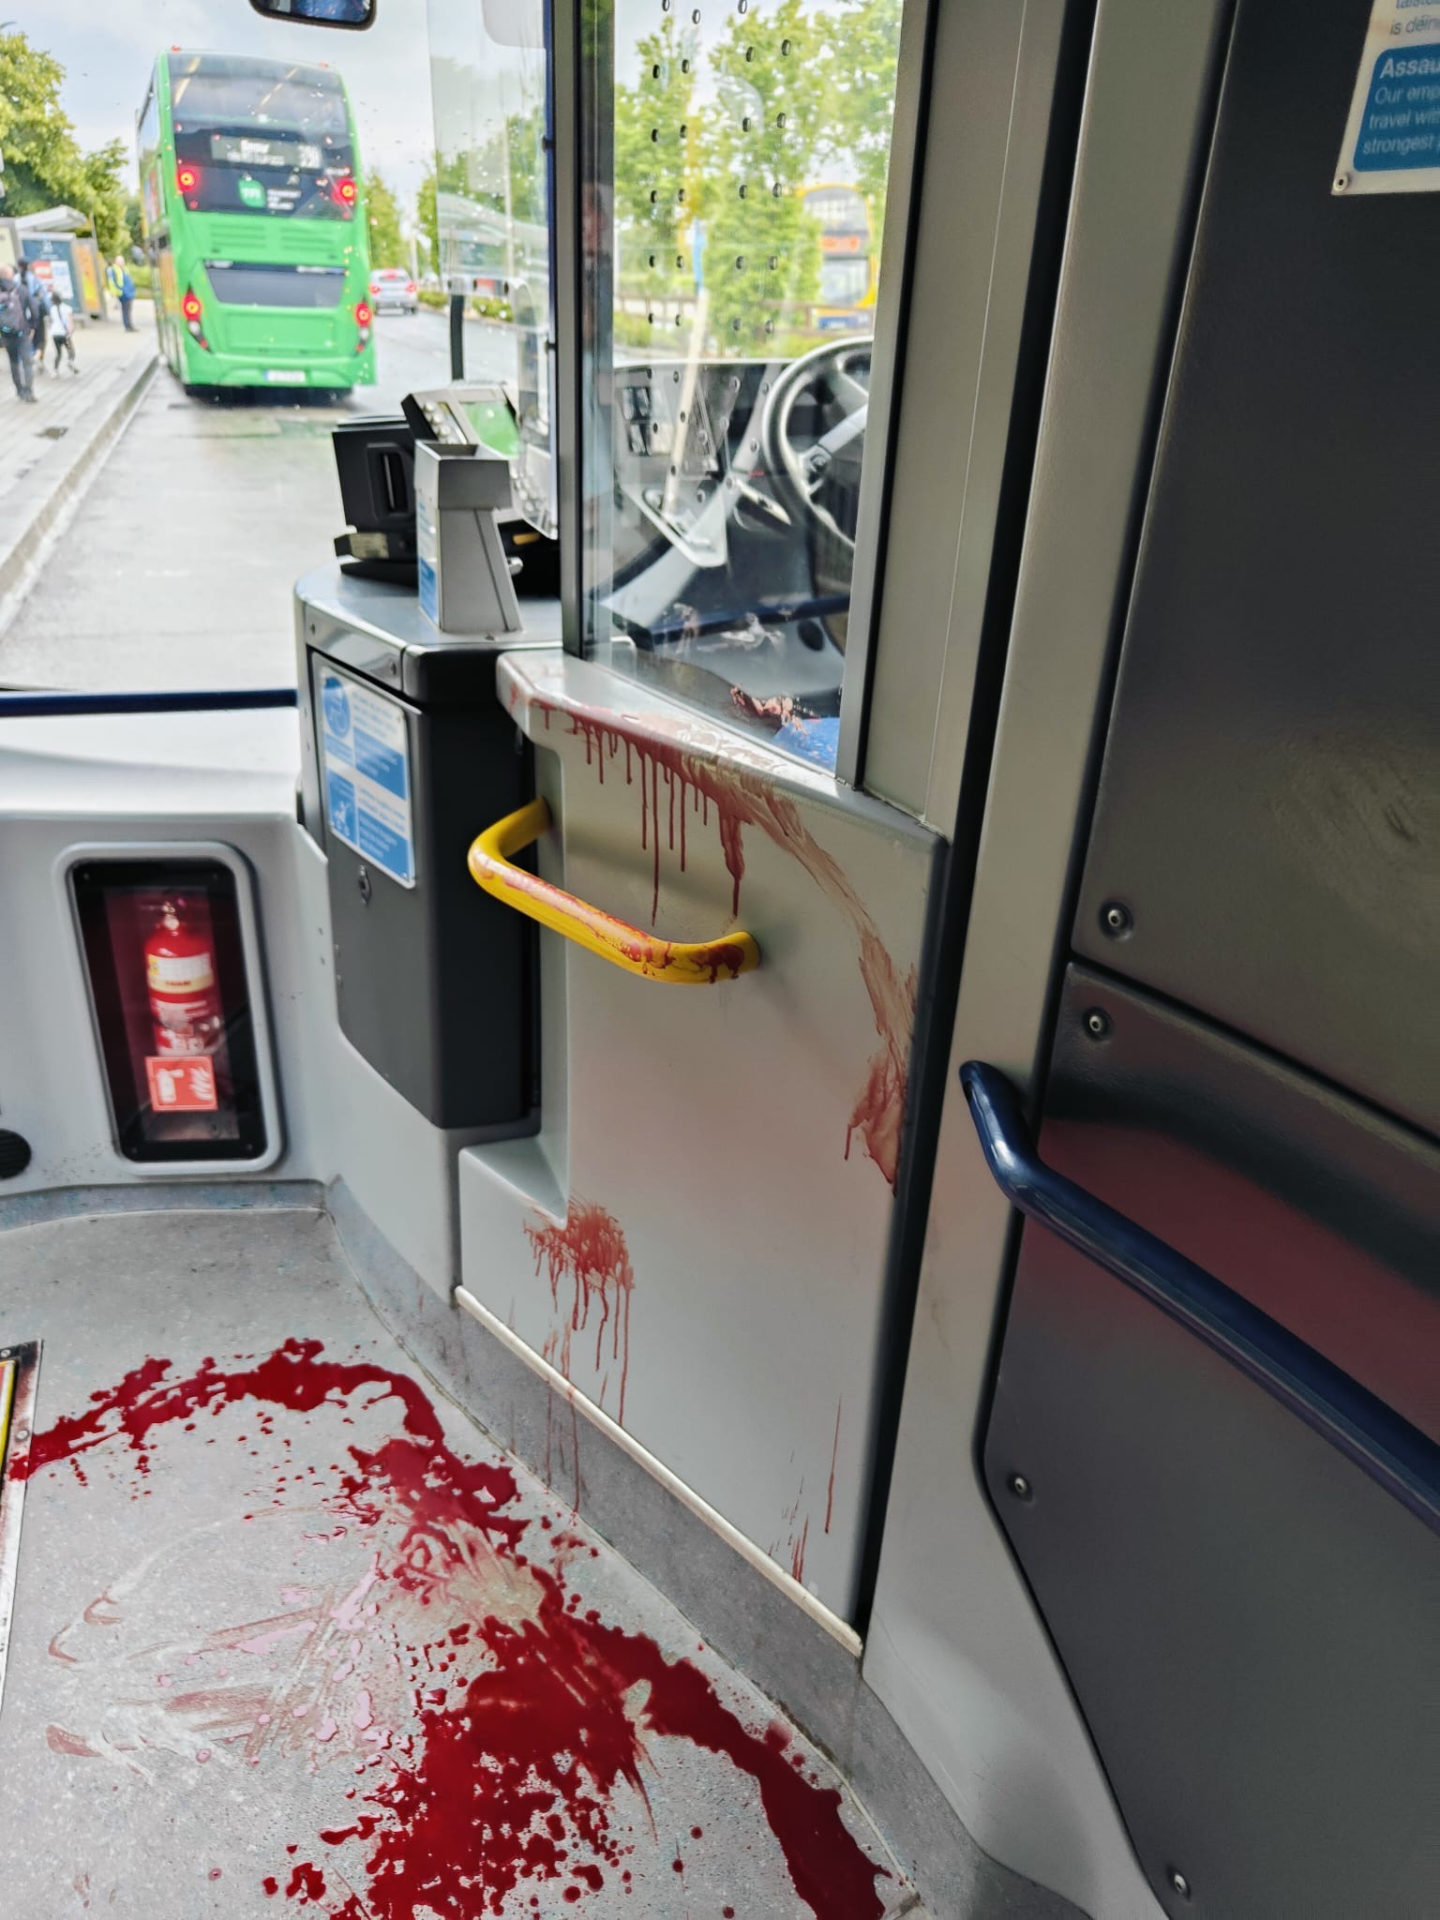 Blood stains outside the driver’s cabin of a Dublin Bus following a serious assault on passenger near Blanchardstown